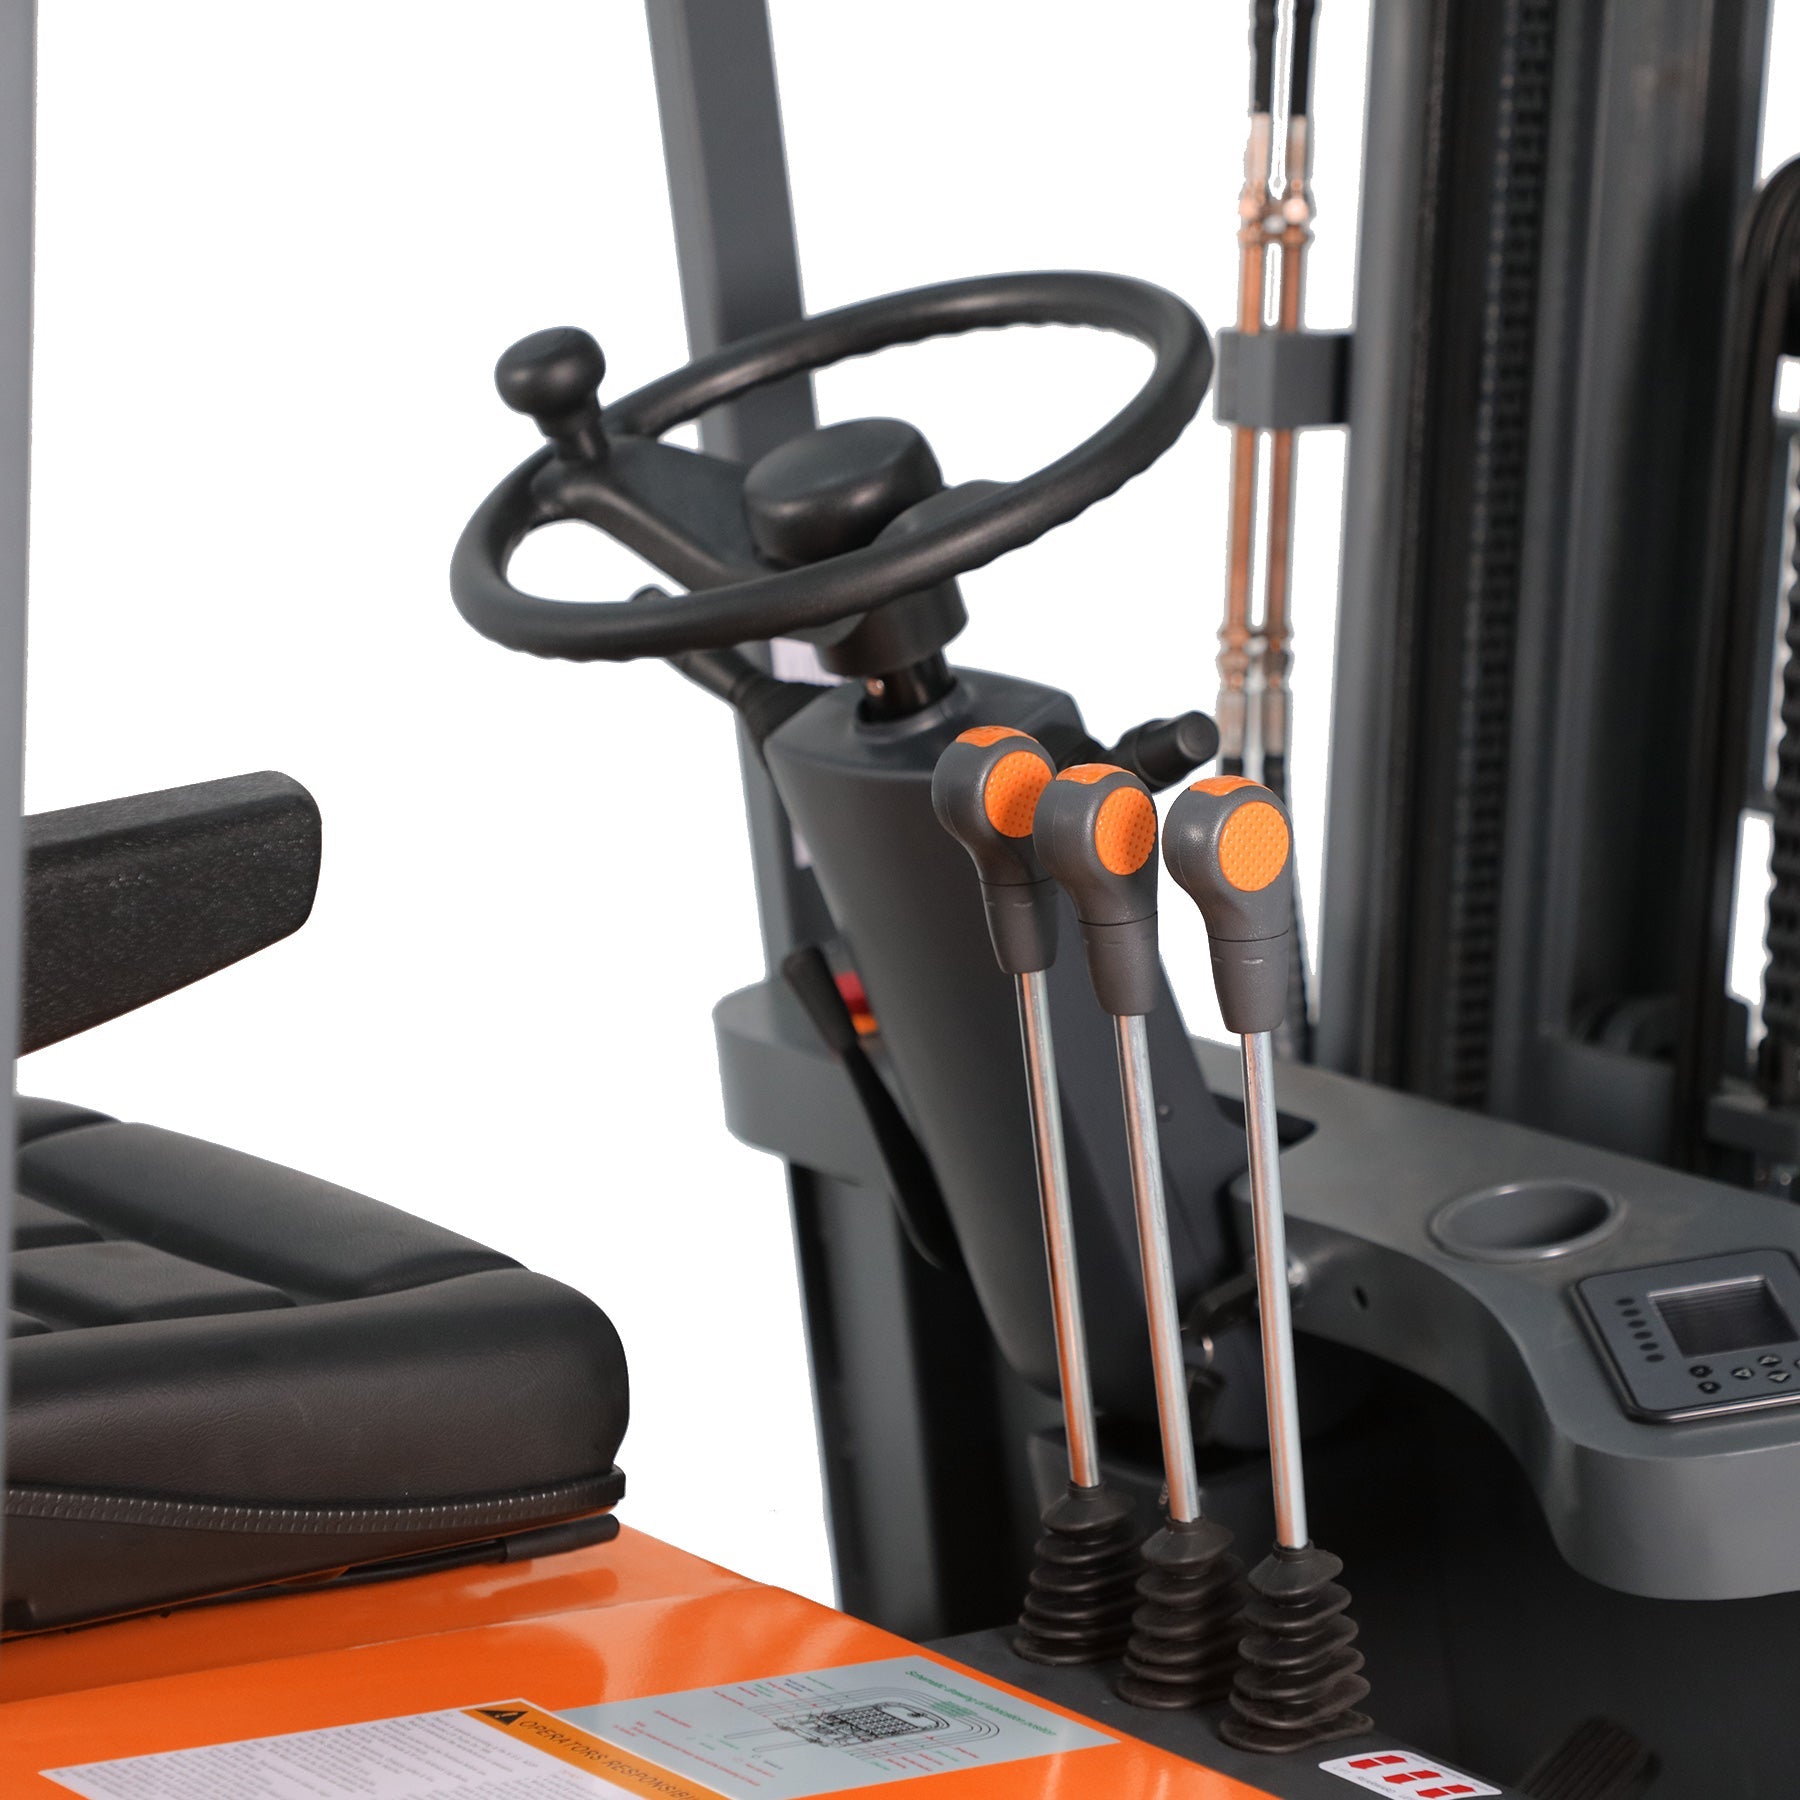 ApolloLift | 3 wheels electric battery powered forklift A-3041